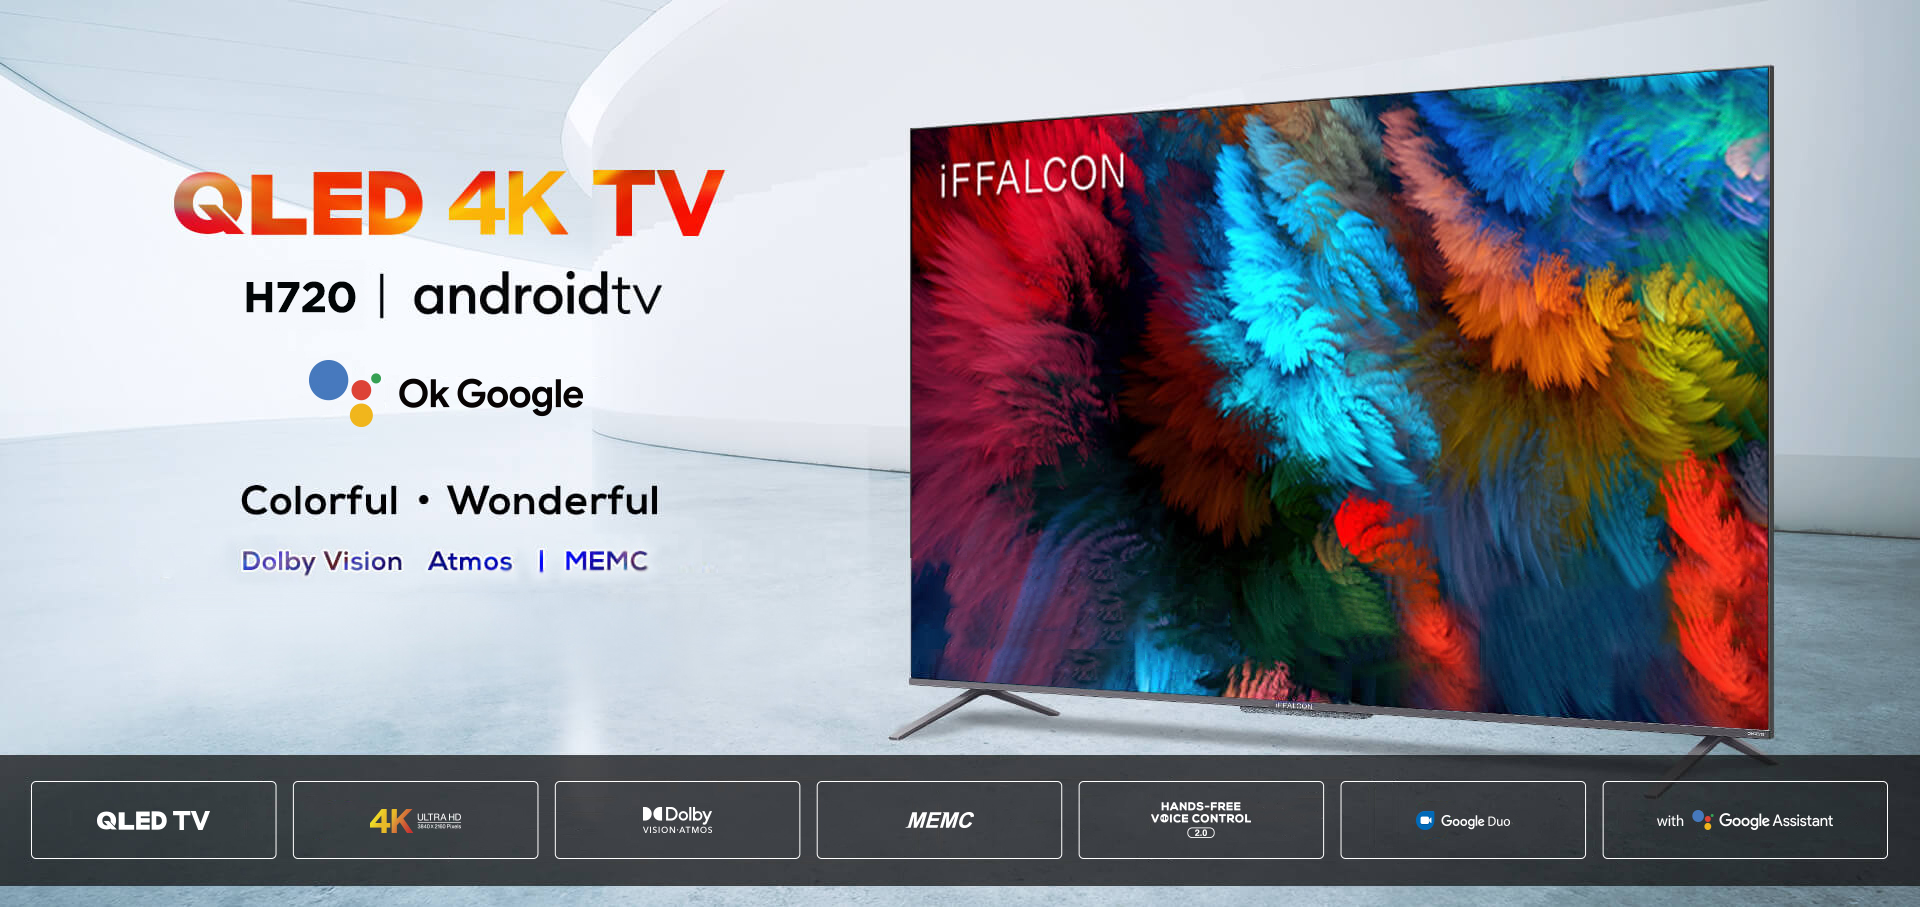 iFFALCON H720 QLED 4K Android TV